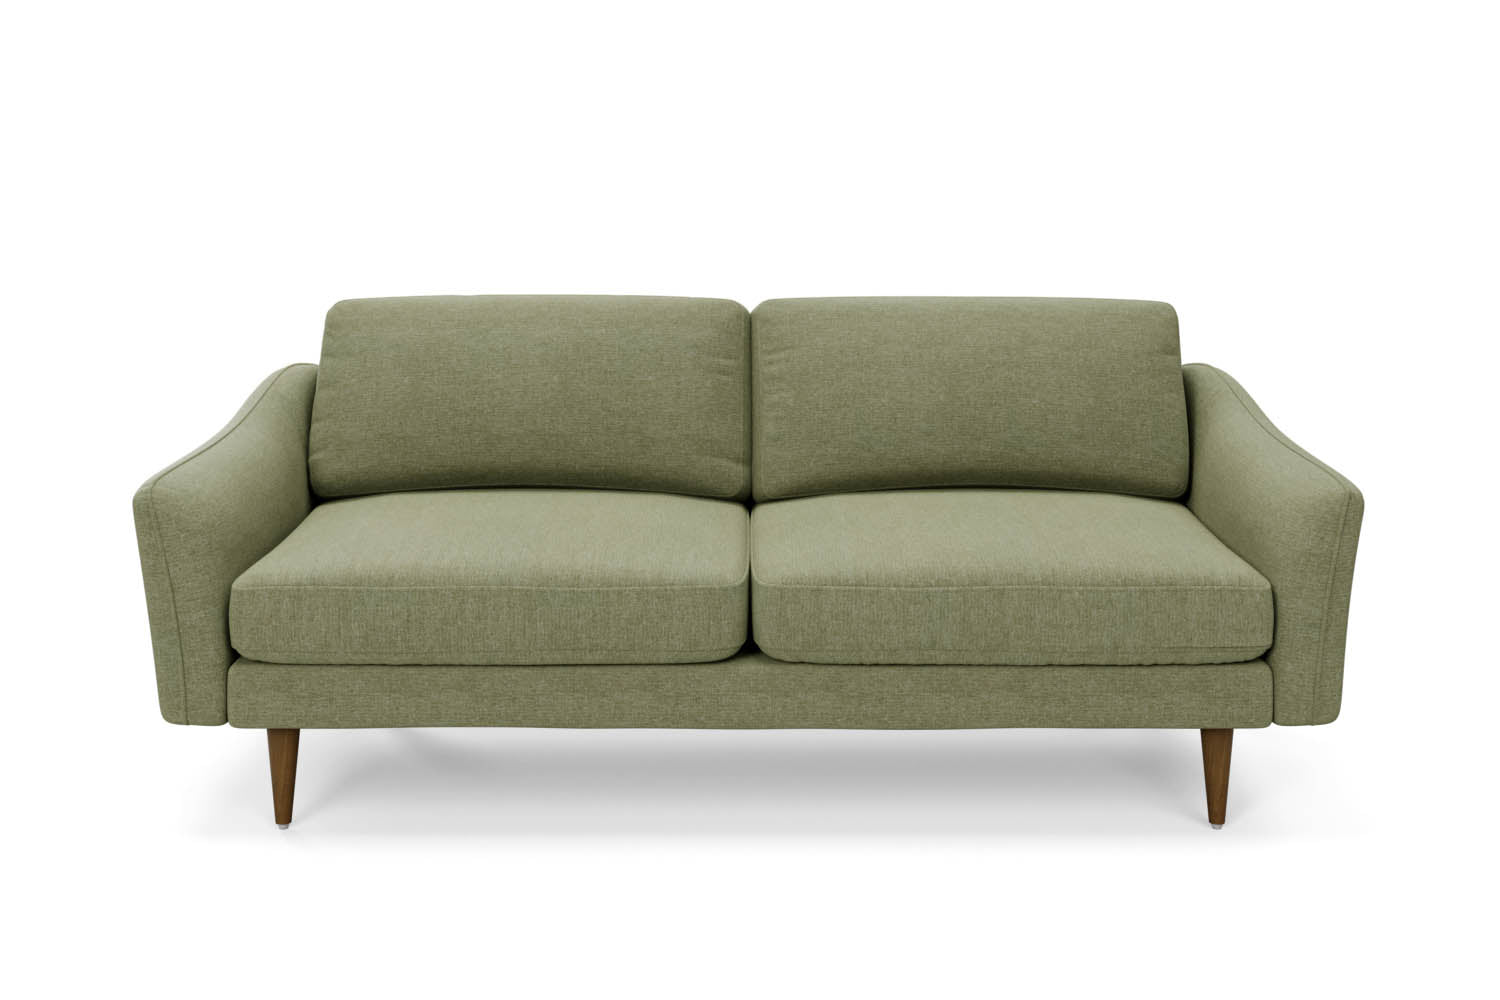 The Rebel 3 Seater Sofa in Sage with black legs front variant_40886317842480